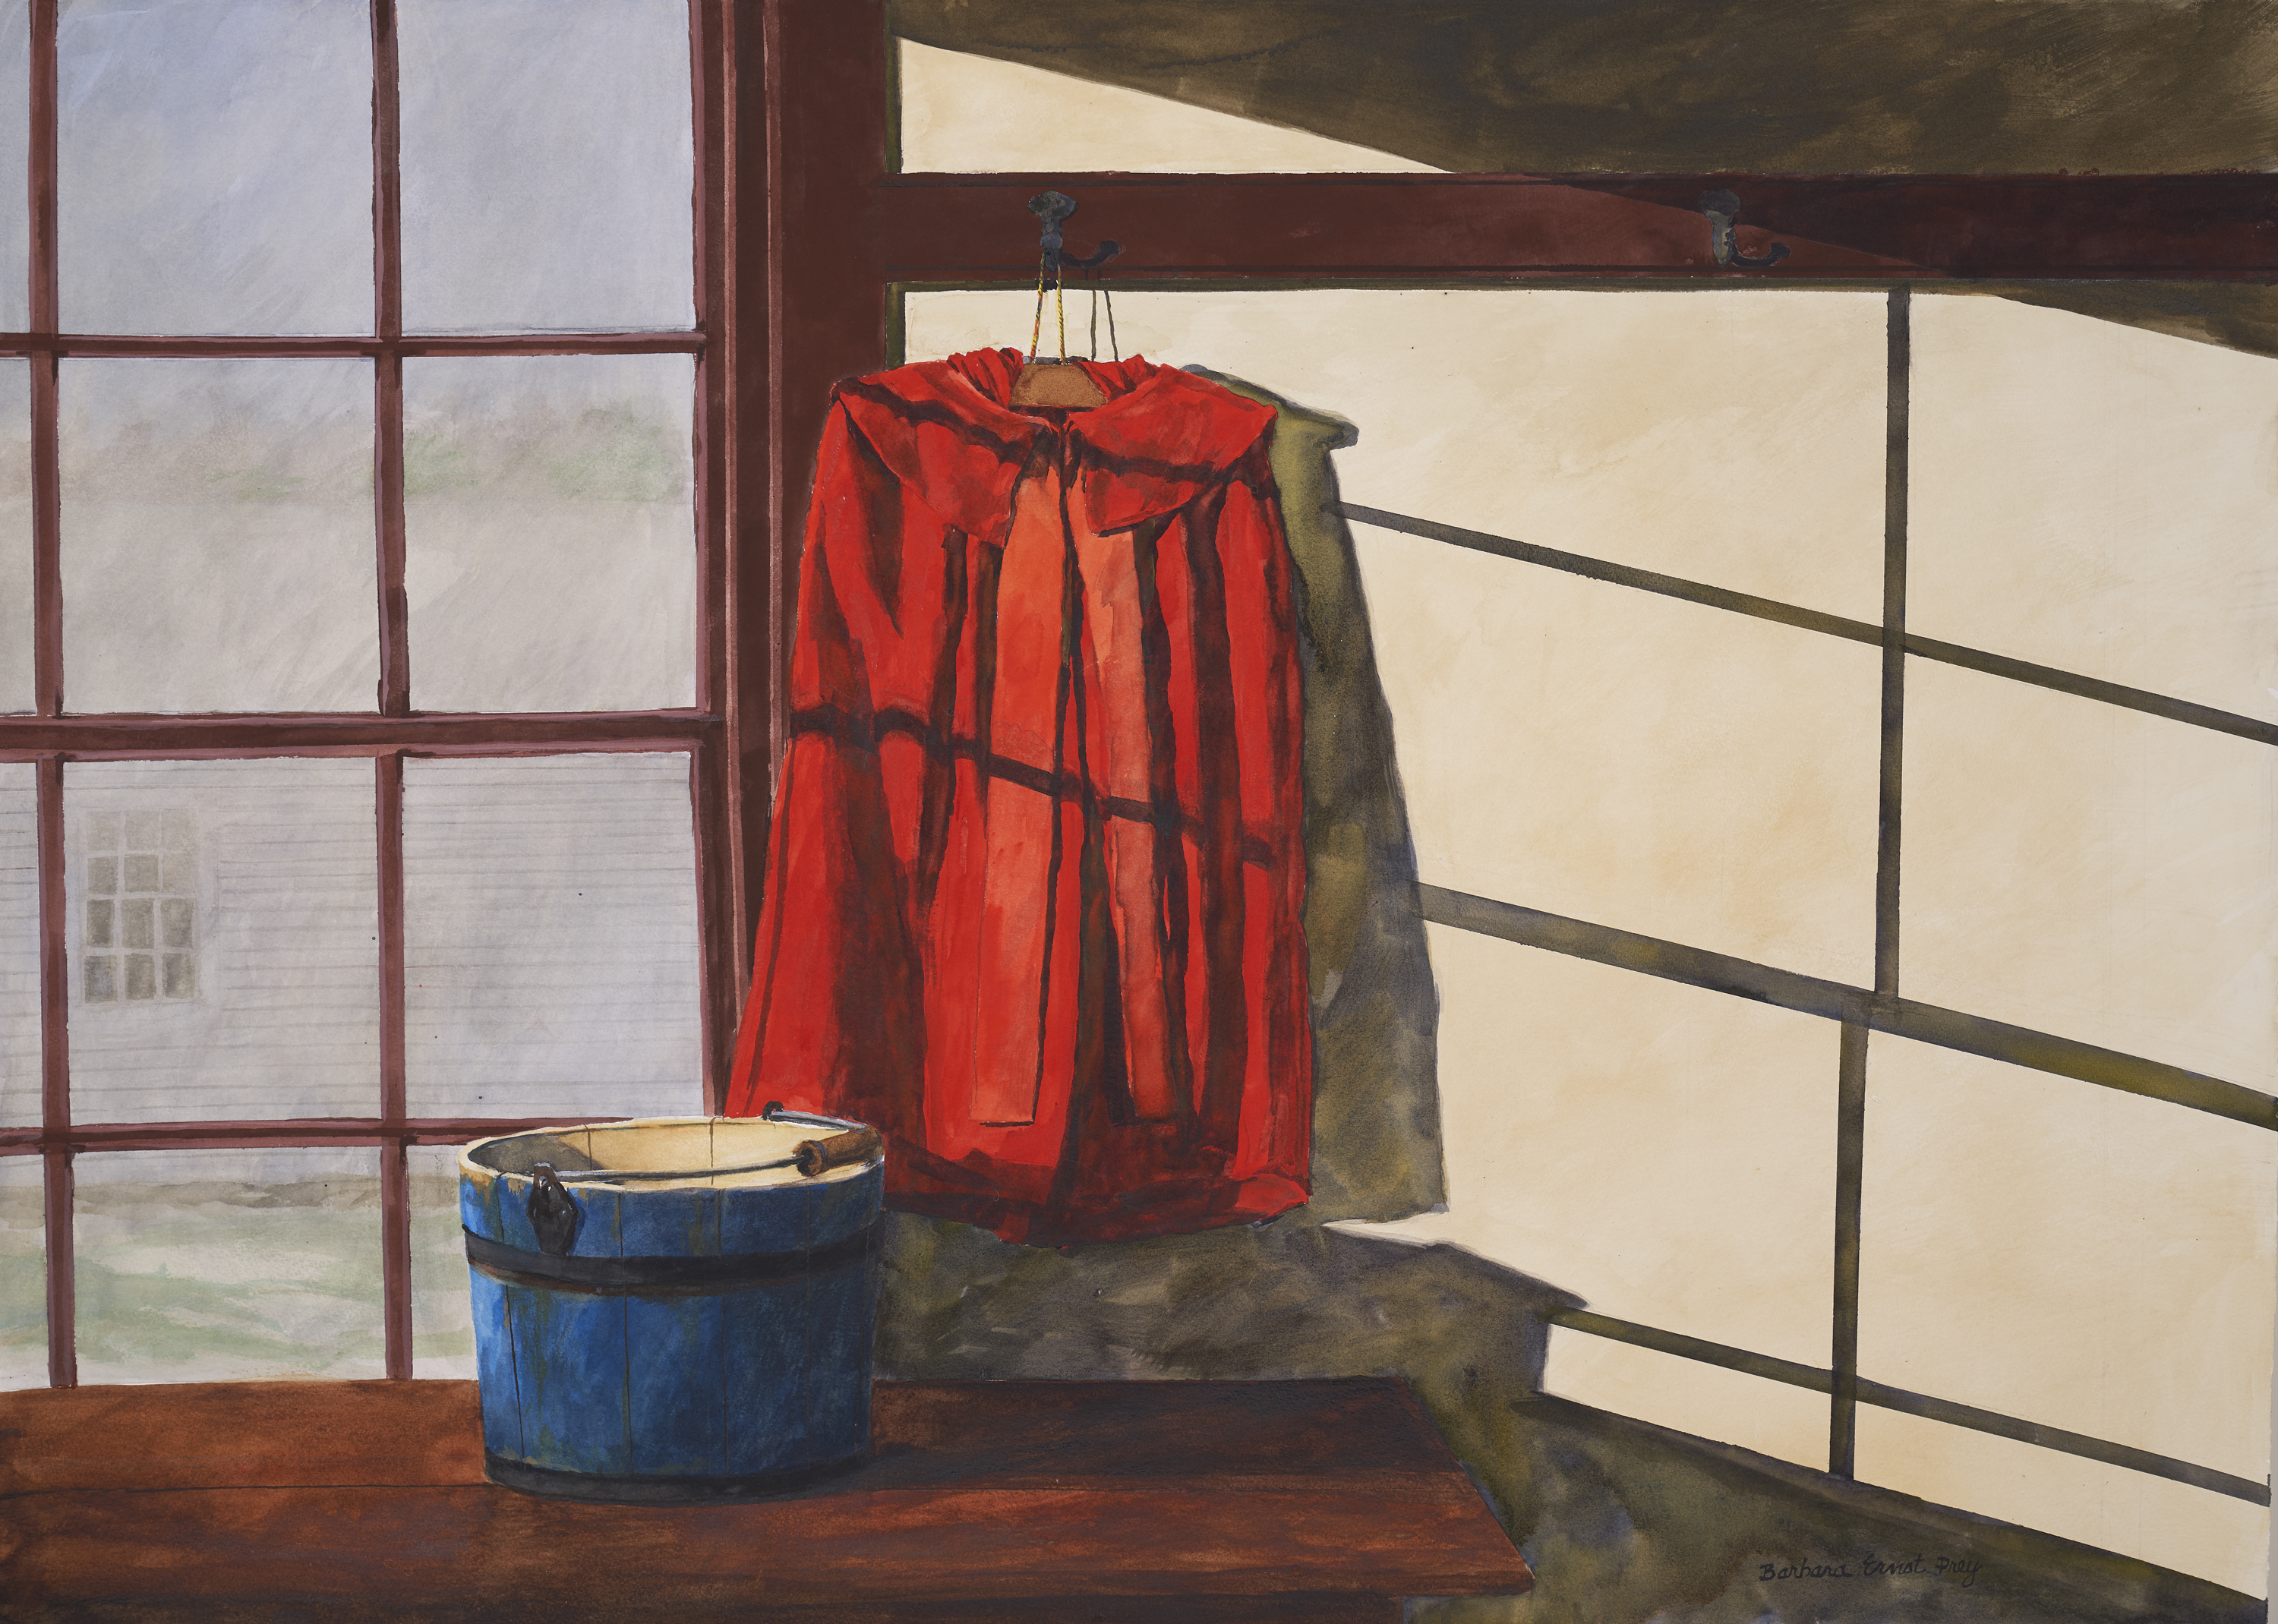 Barbara Ernst Prey, "Red Cloak Blue Bucket," 2019, watercolor and drybrush on paper, 28x40 inches, Courtesy of the artist